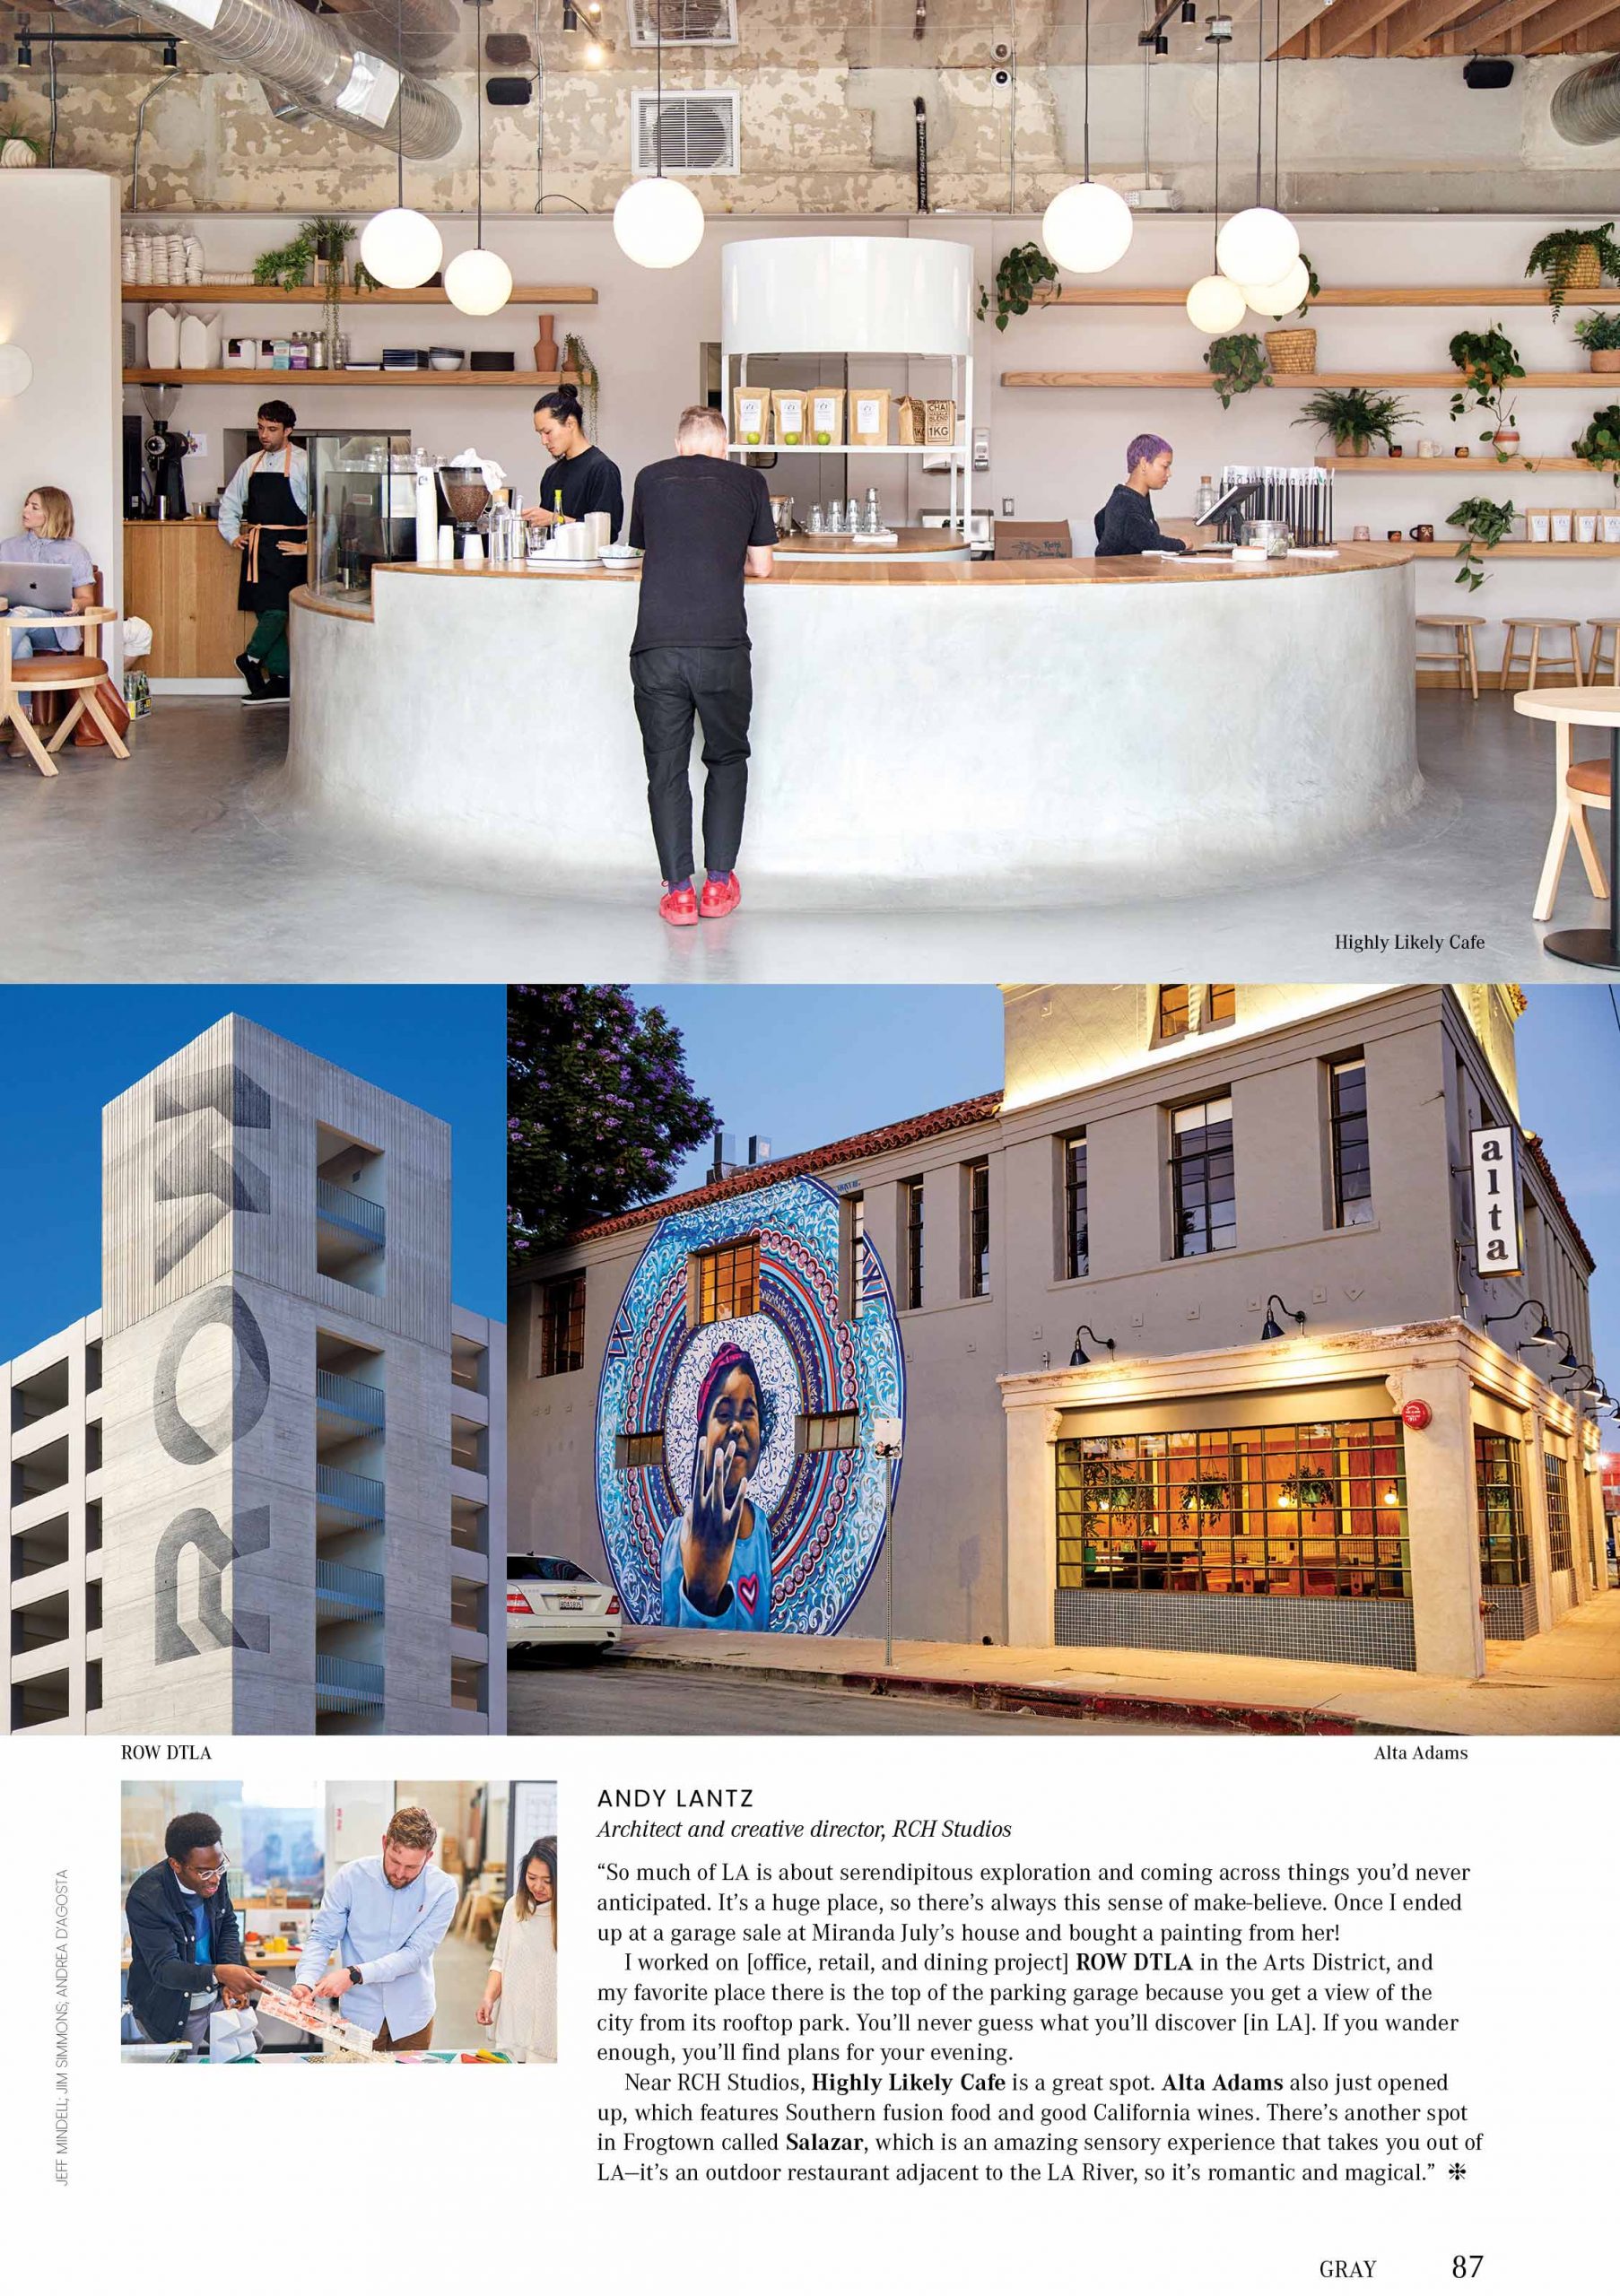 Gray Magazine page with exterior and interior photos of Andy's favorite places in LA